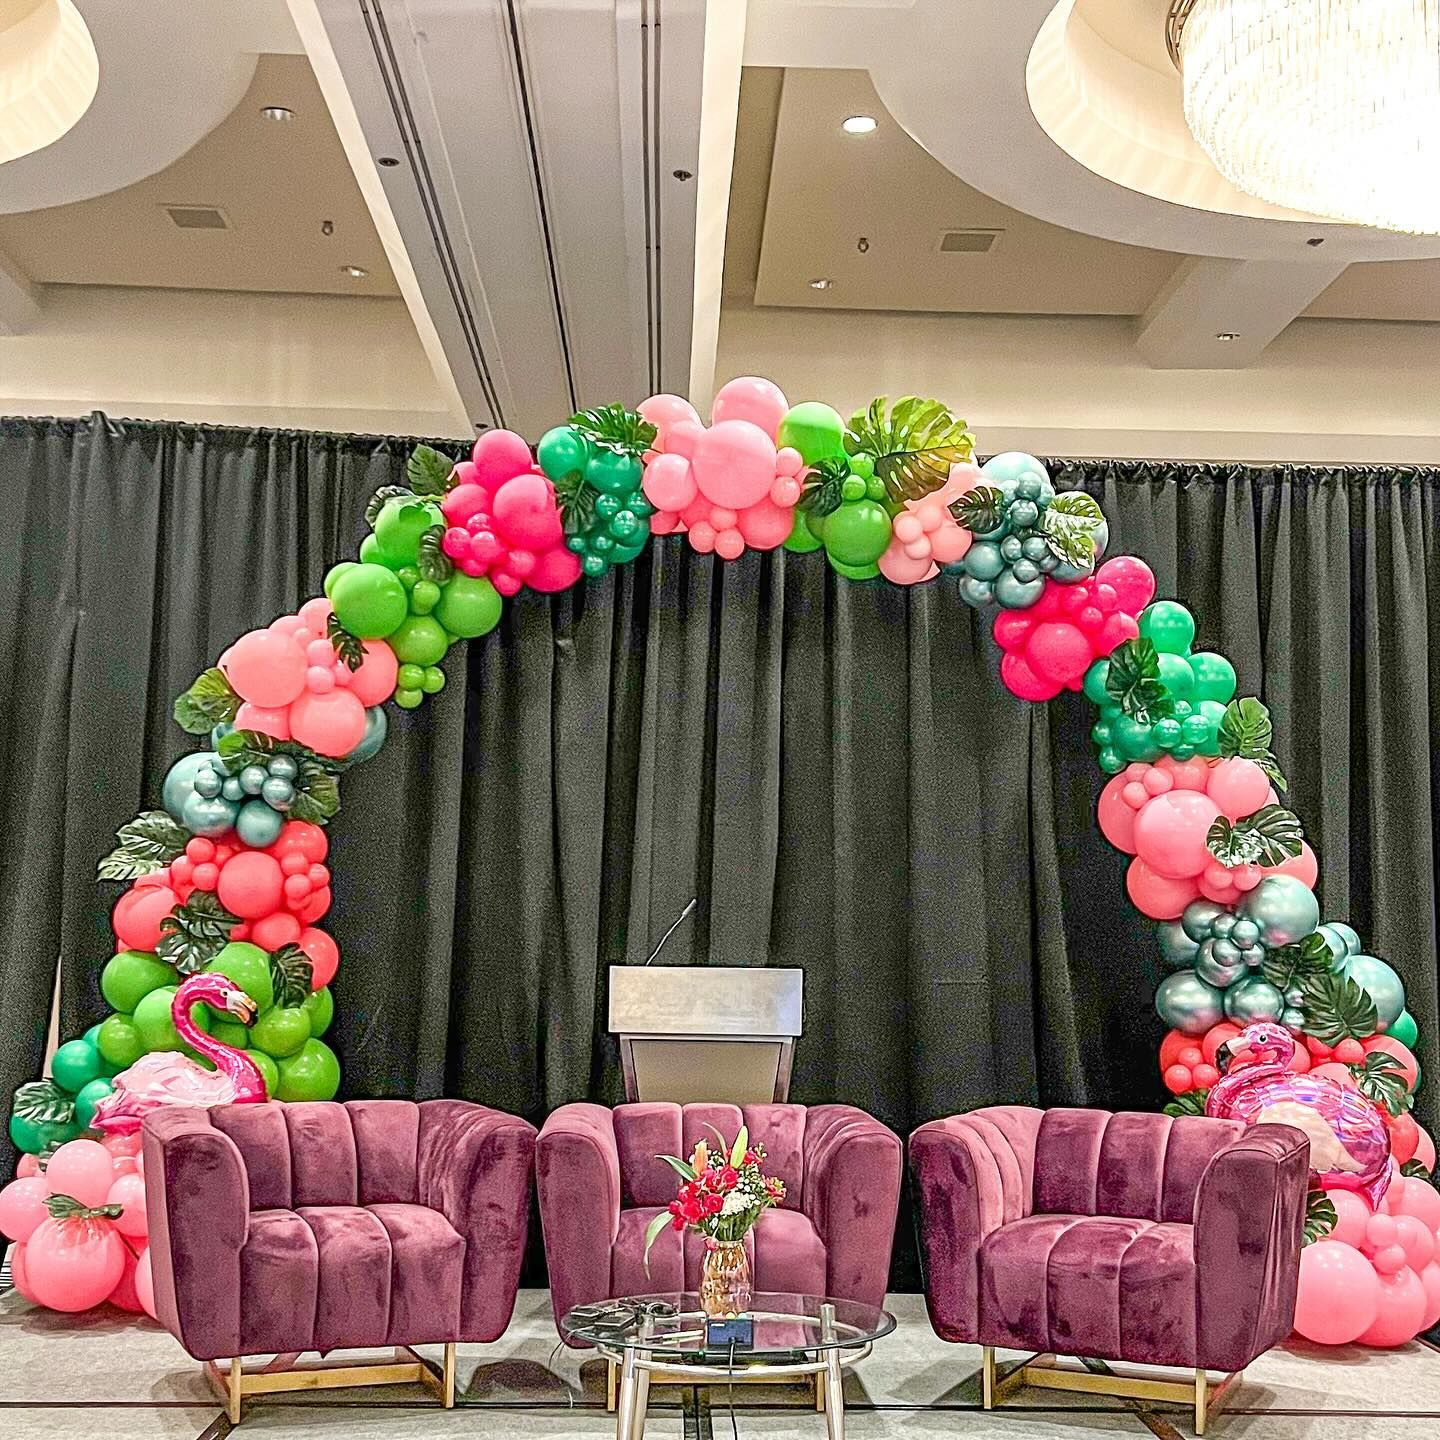 A room decorated with a flamingo balloon arch.